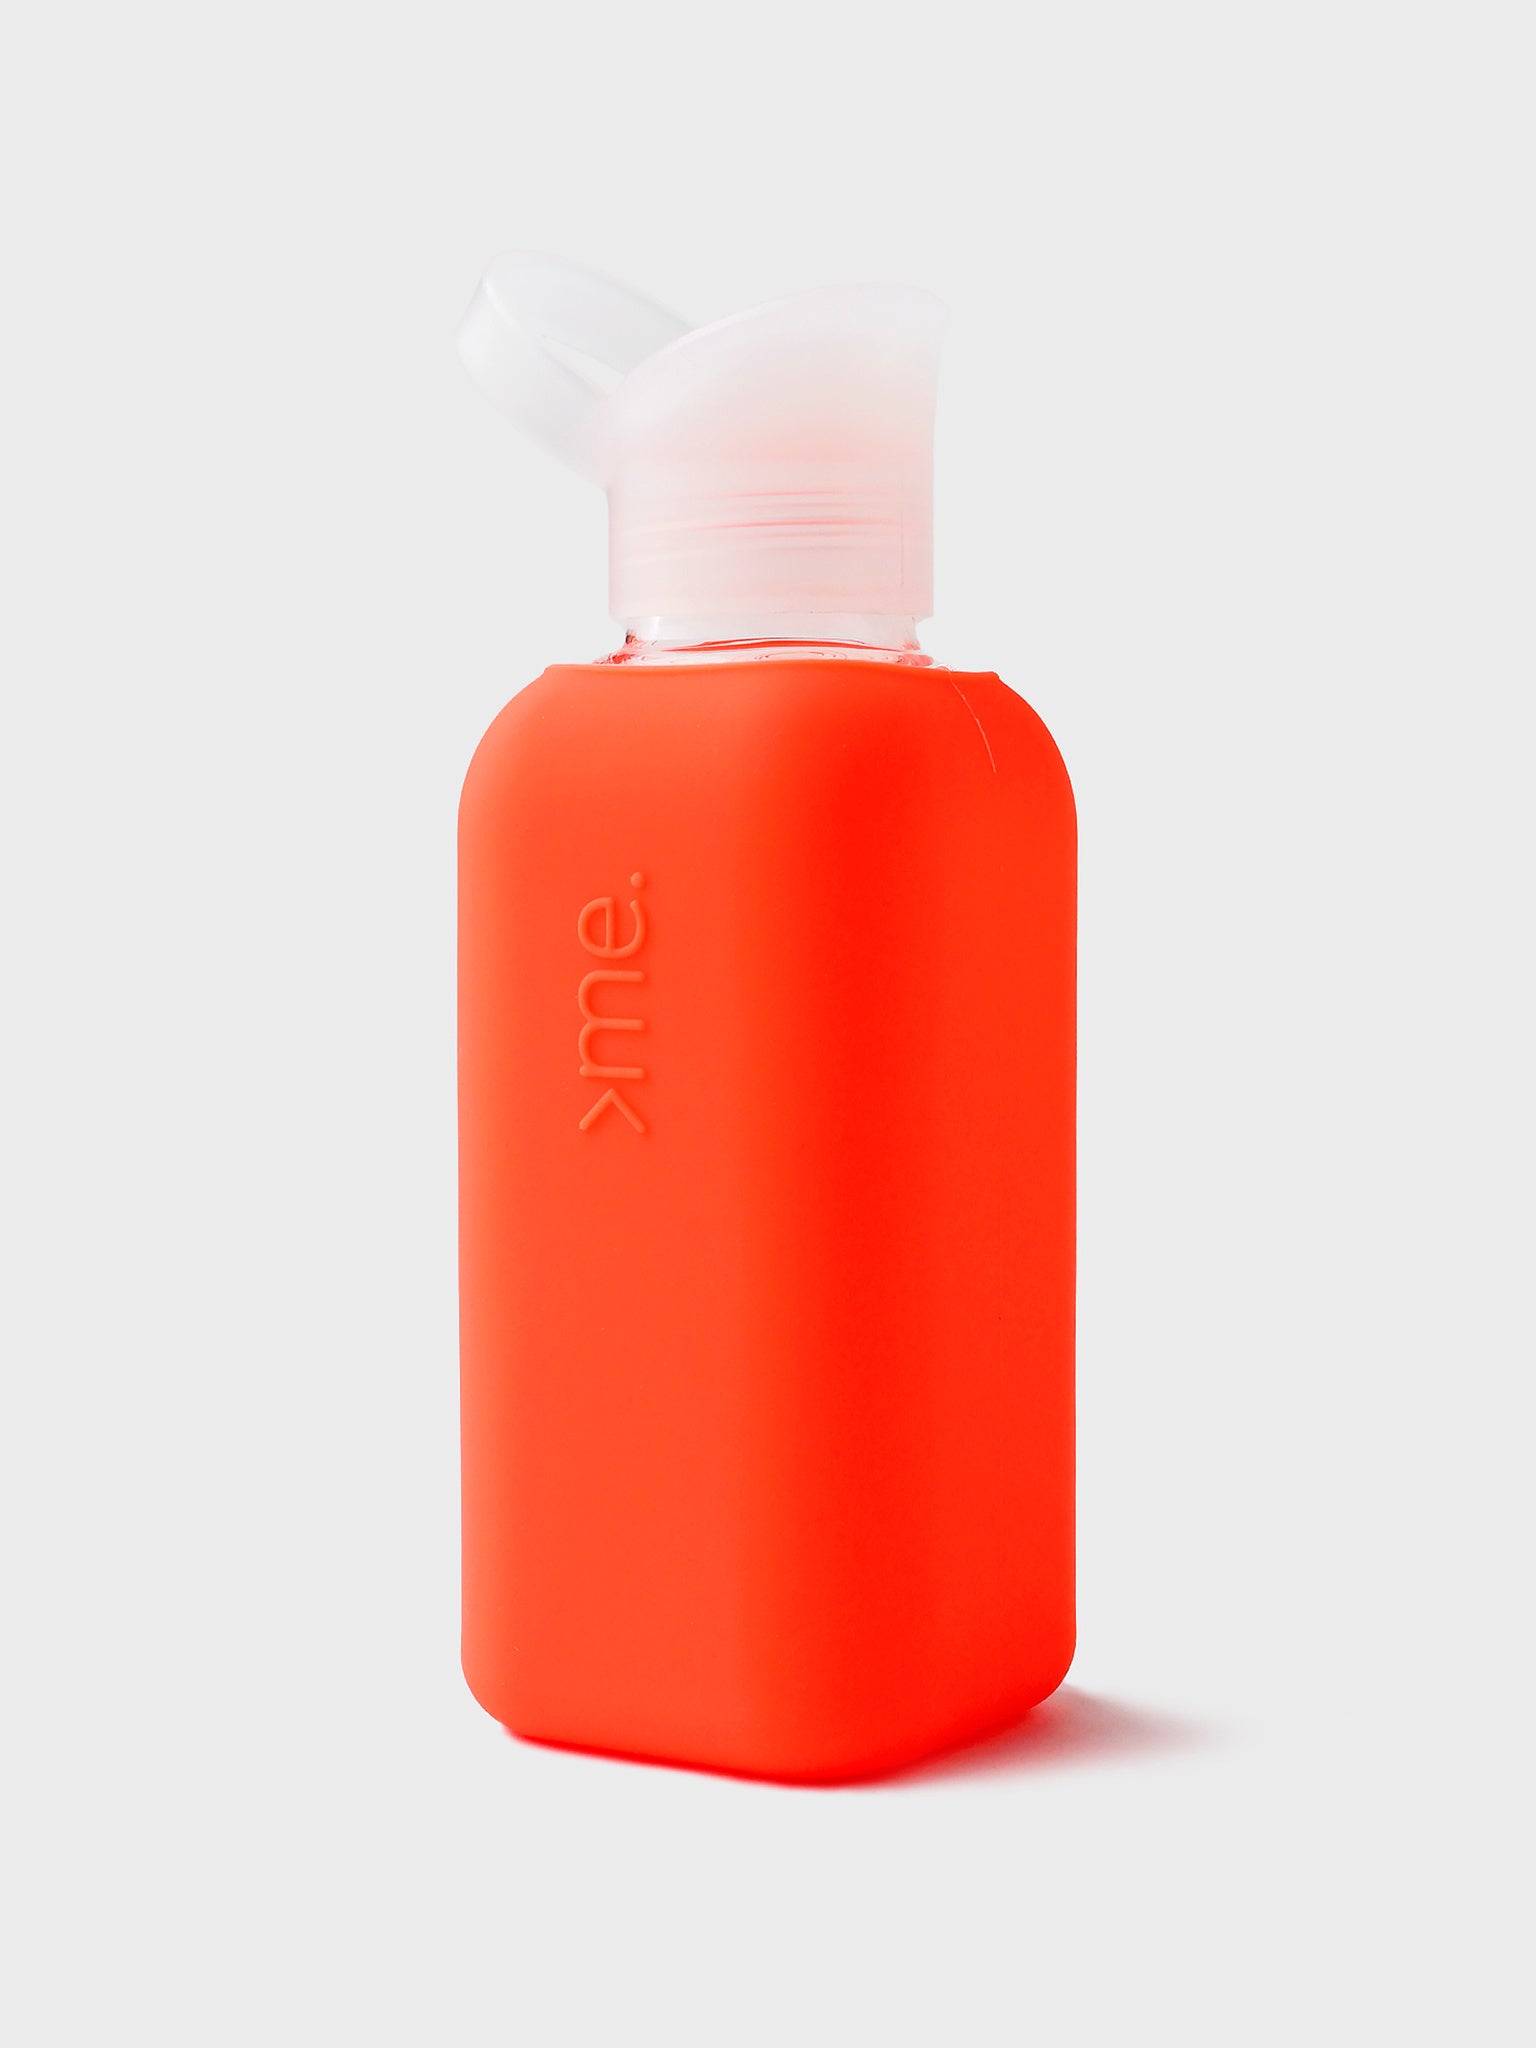 Squireme - Glass Silicon Bottle Blue